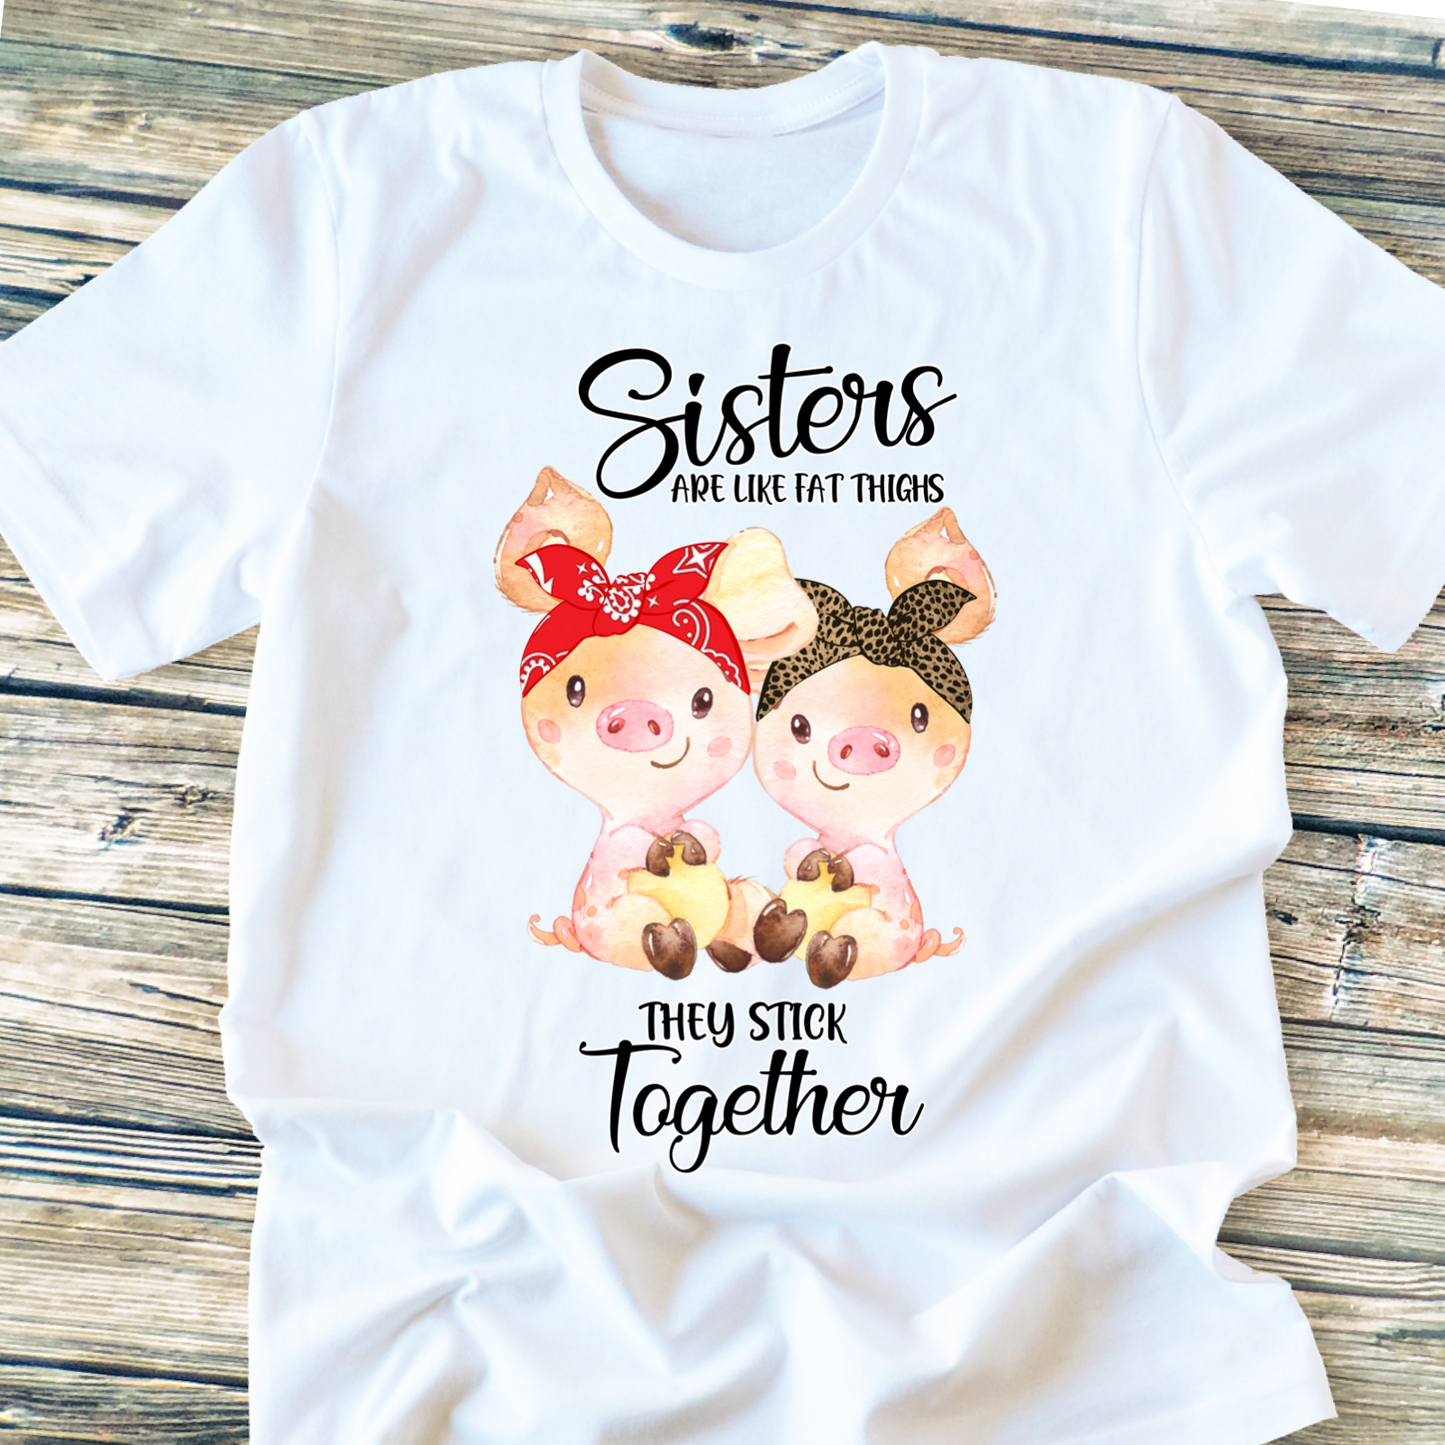 Sisters are like thick thighs we stick together pigs DTF TRANSFERPRINT TO ORDER